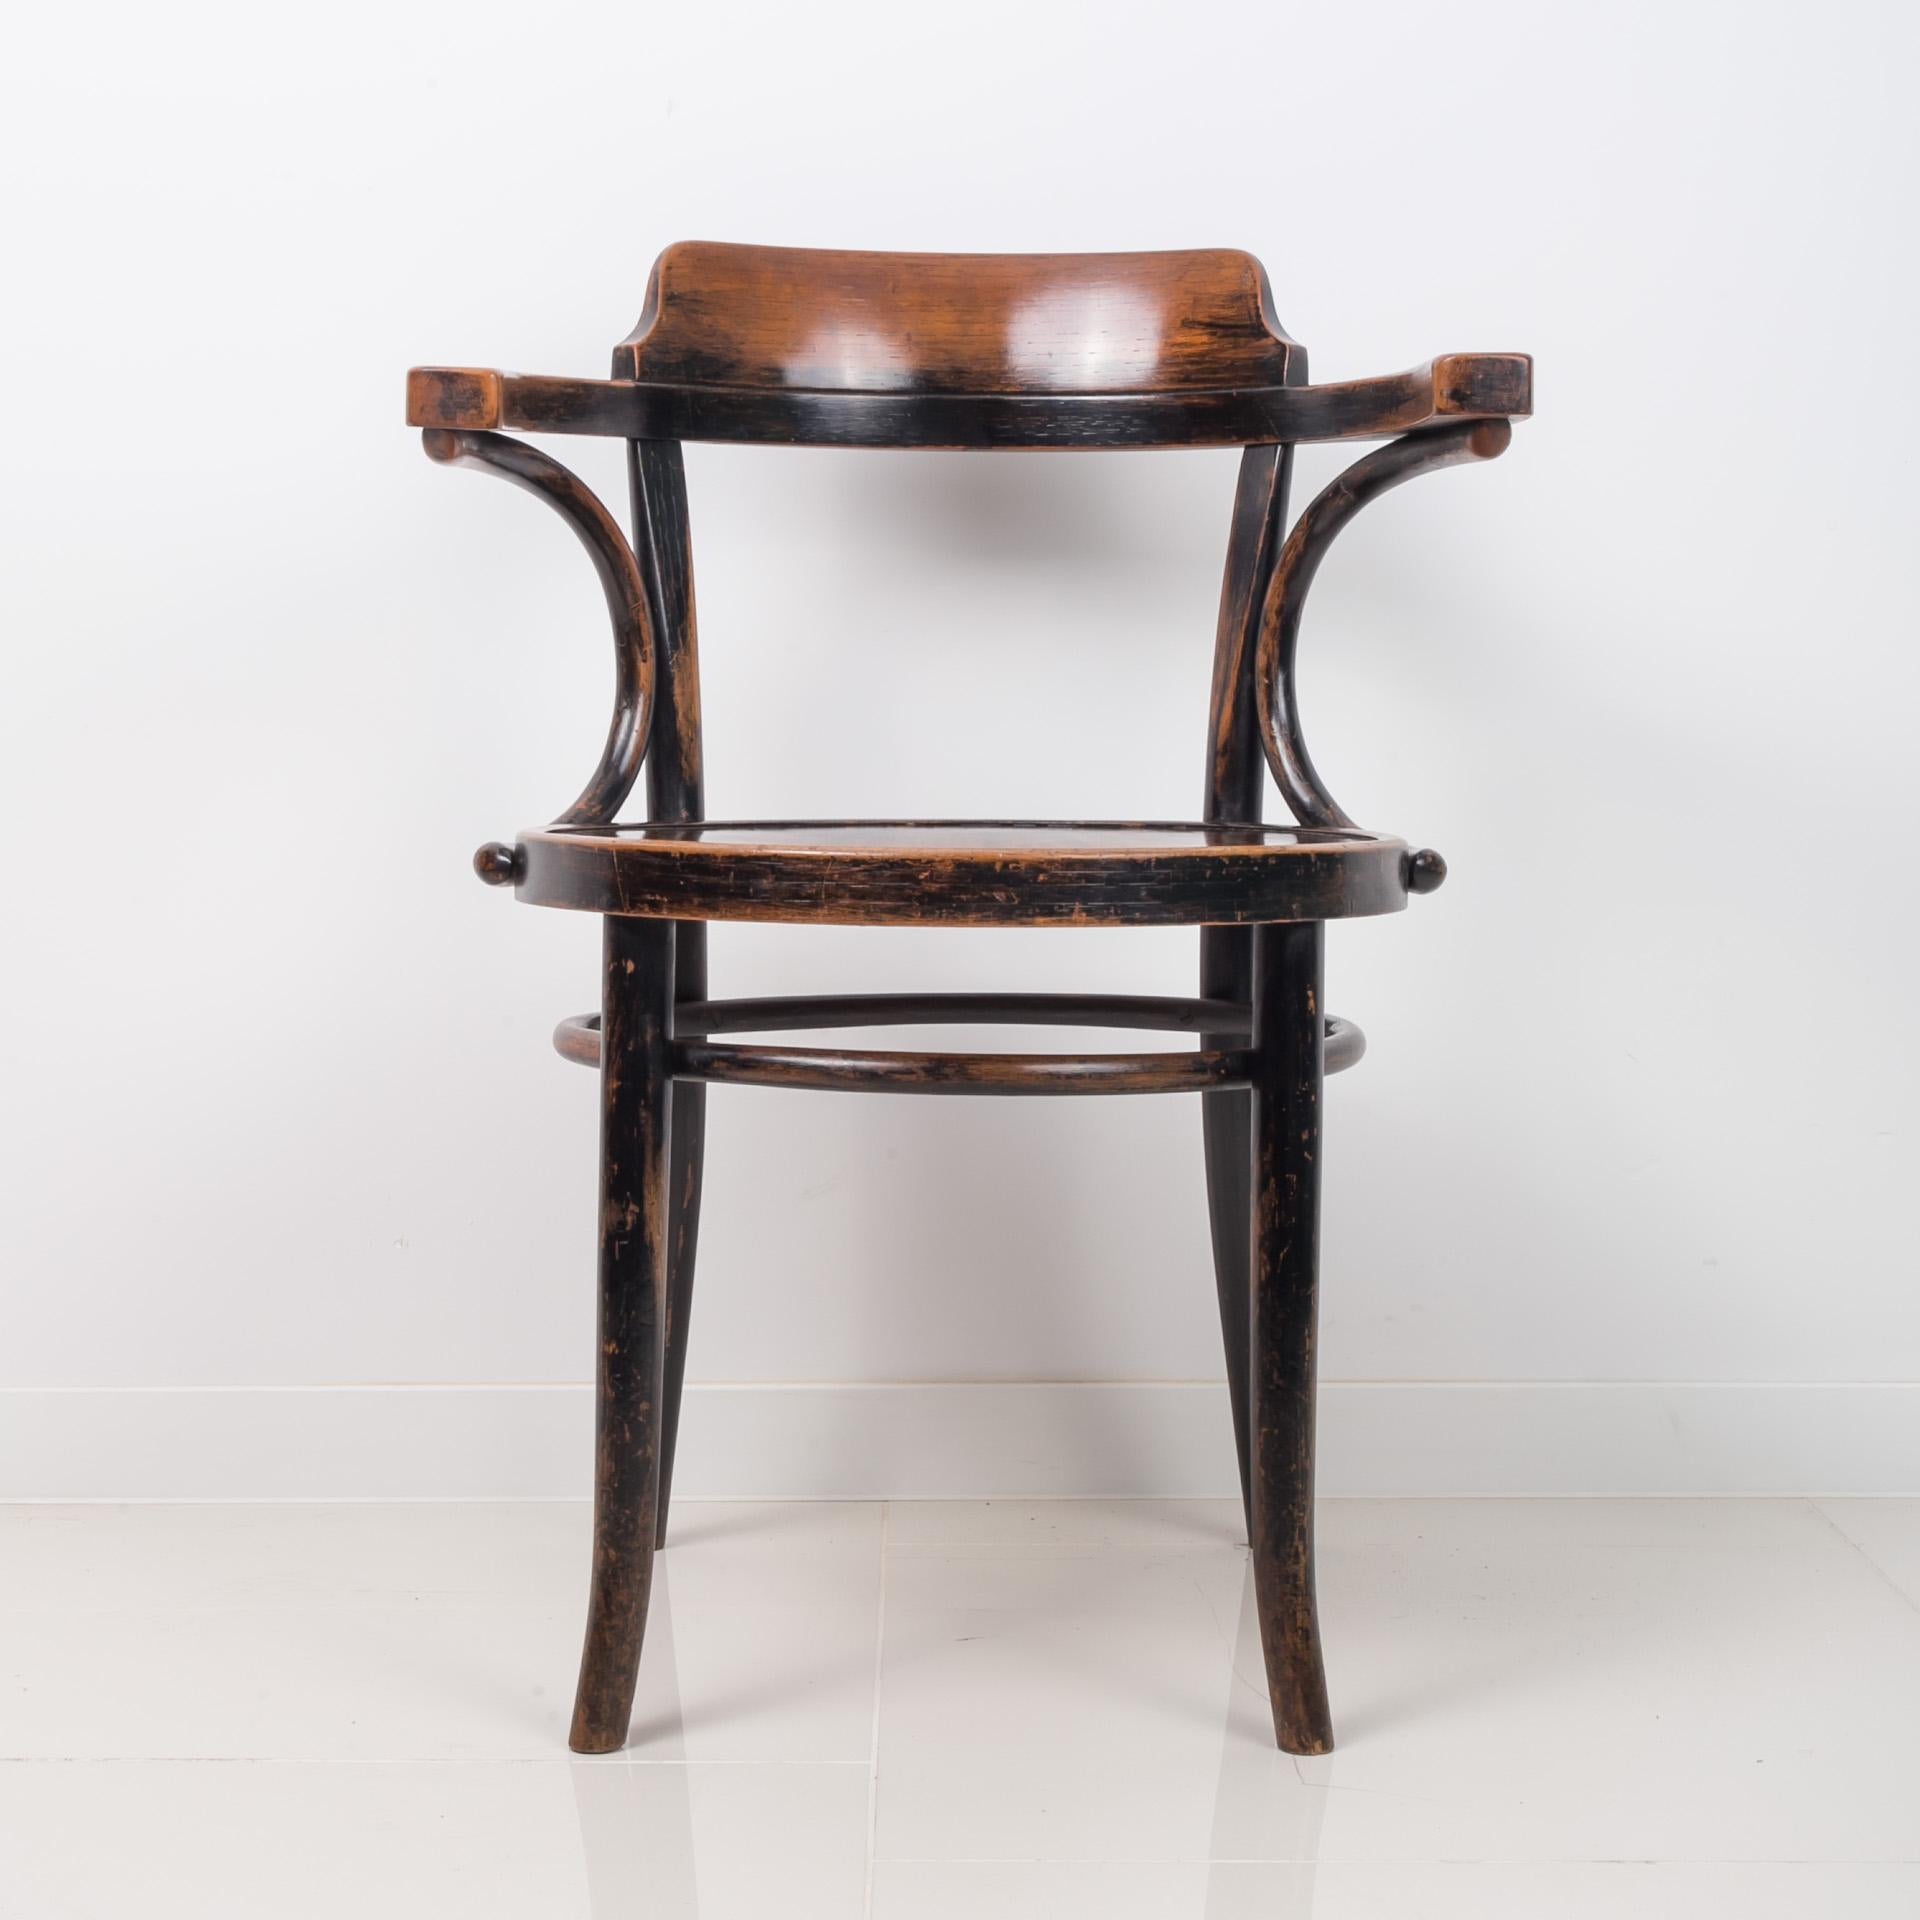 Art Nouveau Iconic Thonet Chair Designed by M. Thonet, Bentwood, 1920s